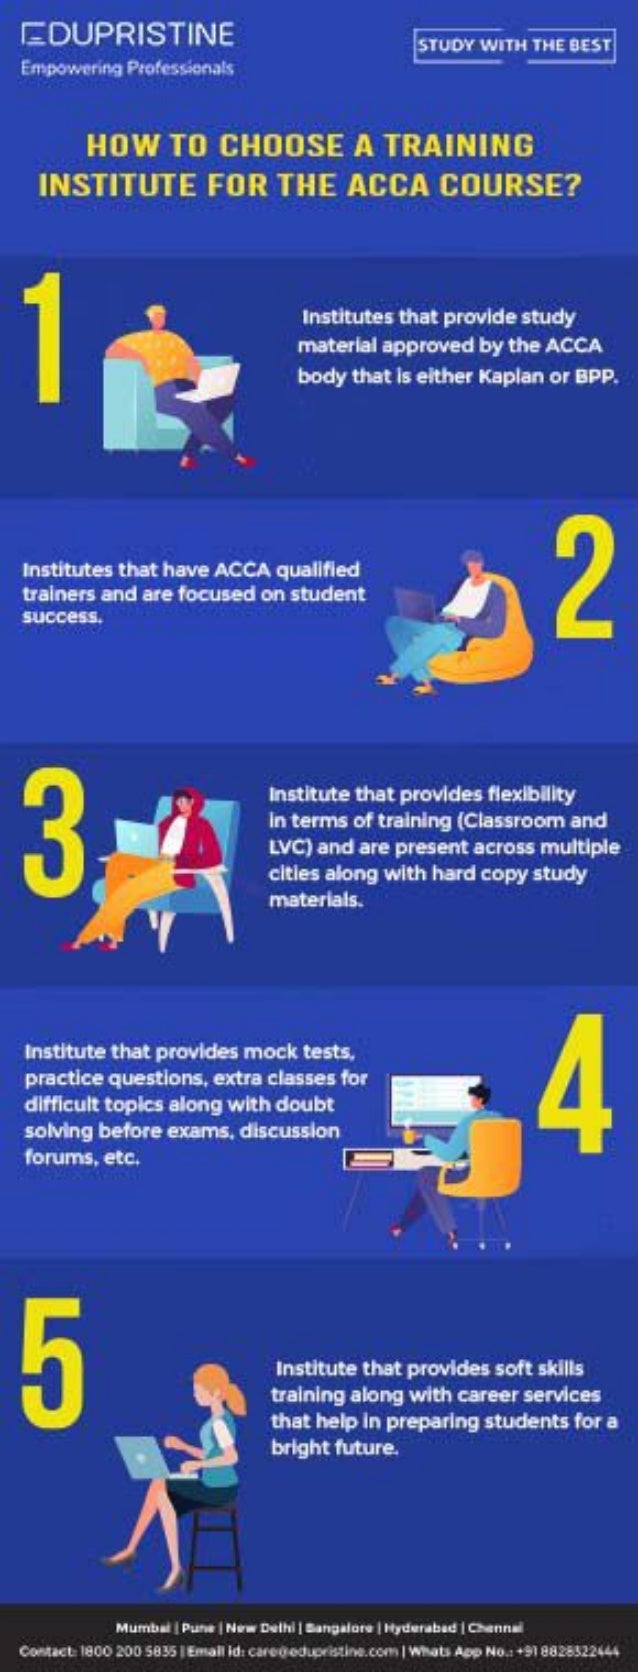 How to choose a training institute for the ACCA course?